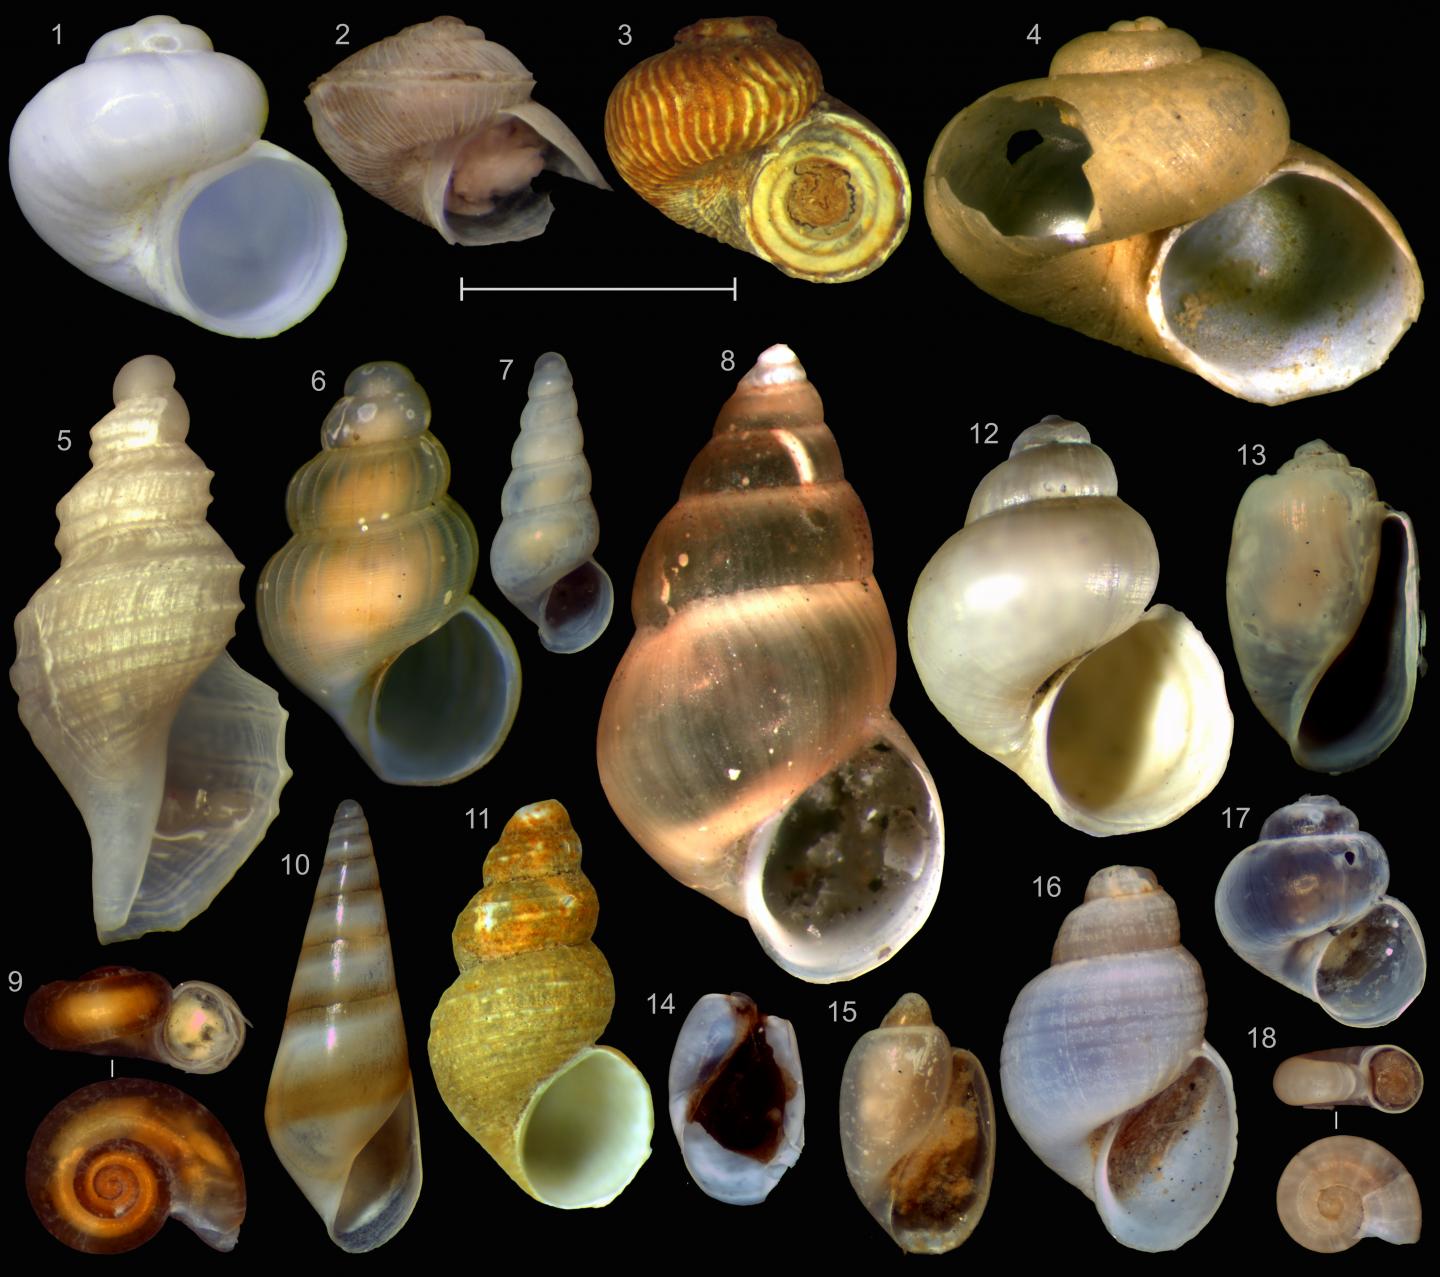 Microgastropods